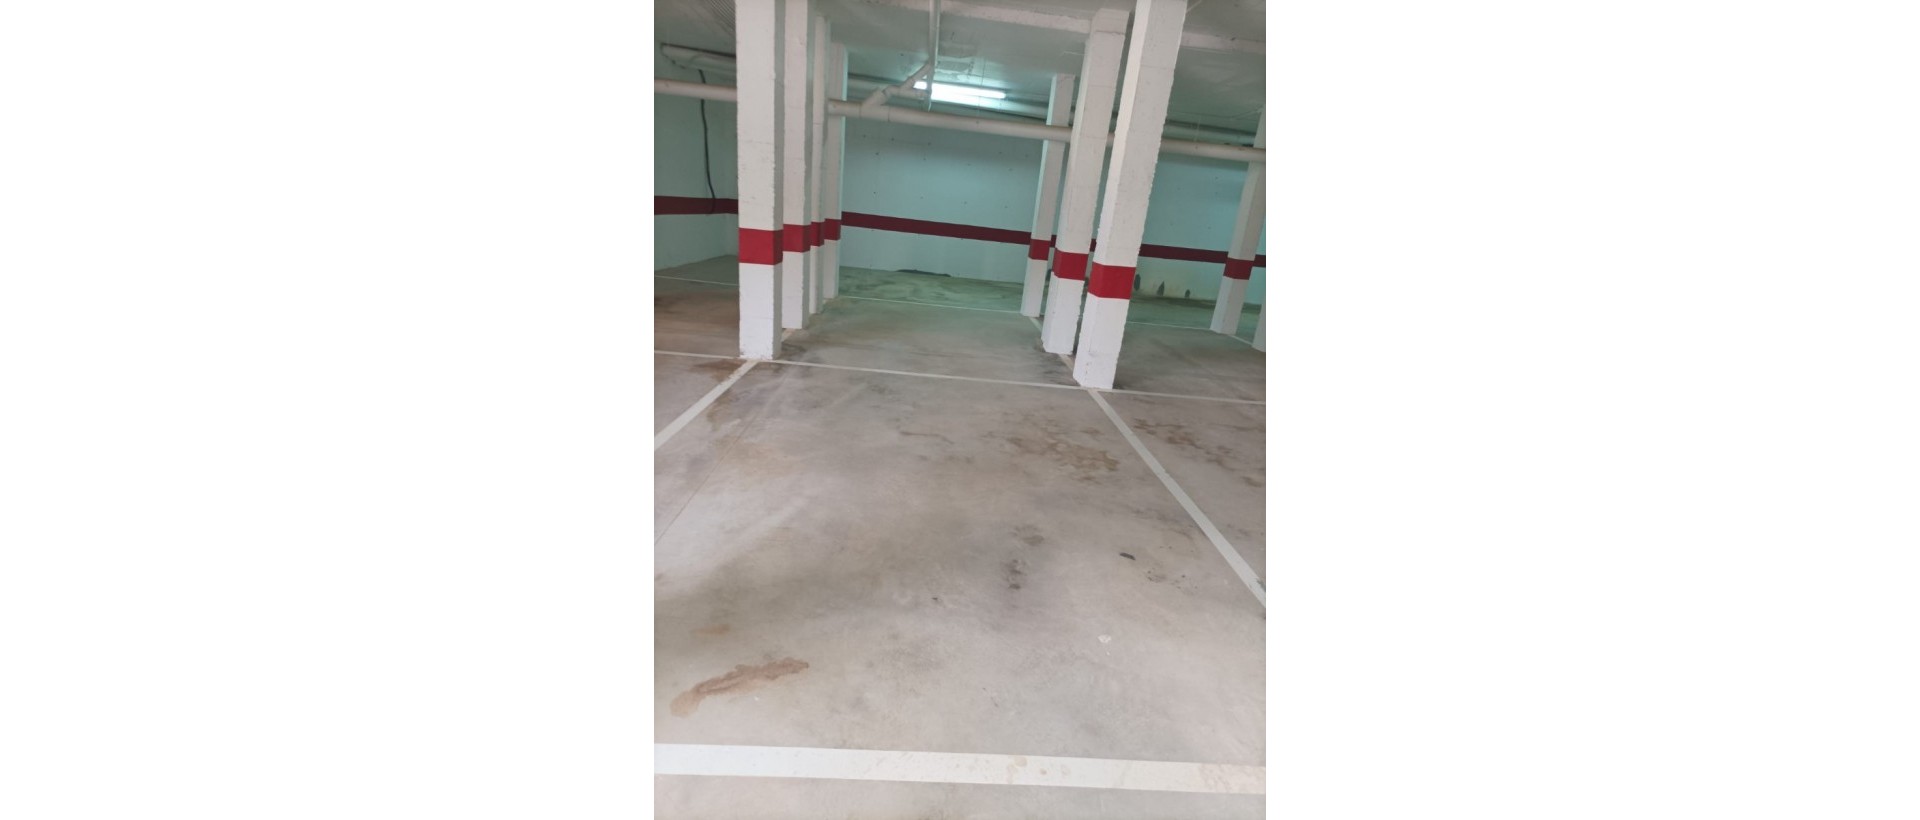 Parking places for sale with or without storage room in region La Zenia, Orihuela Costa, Alicante